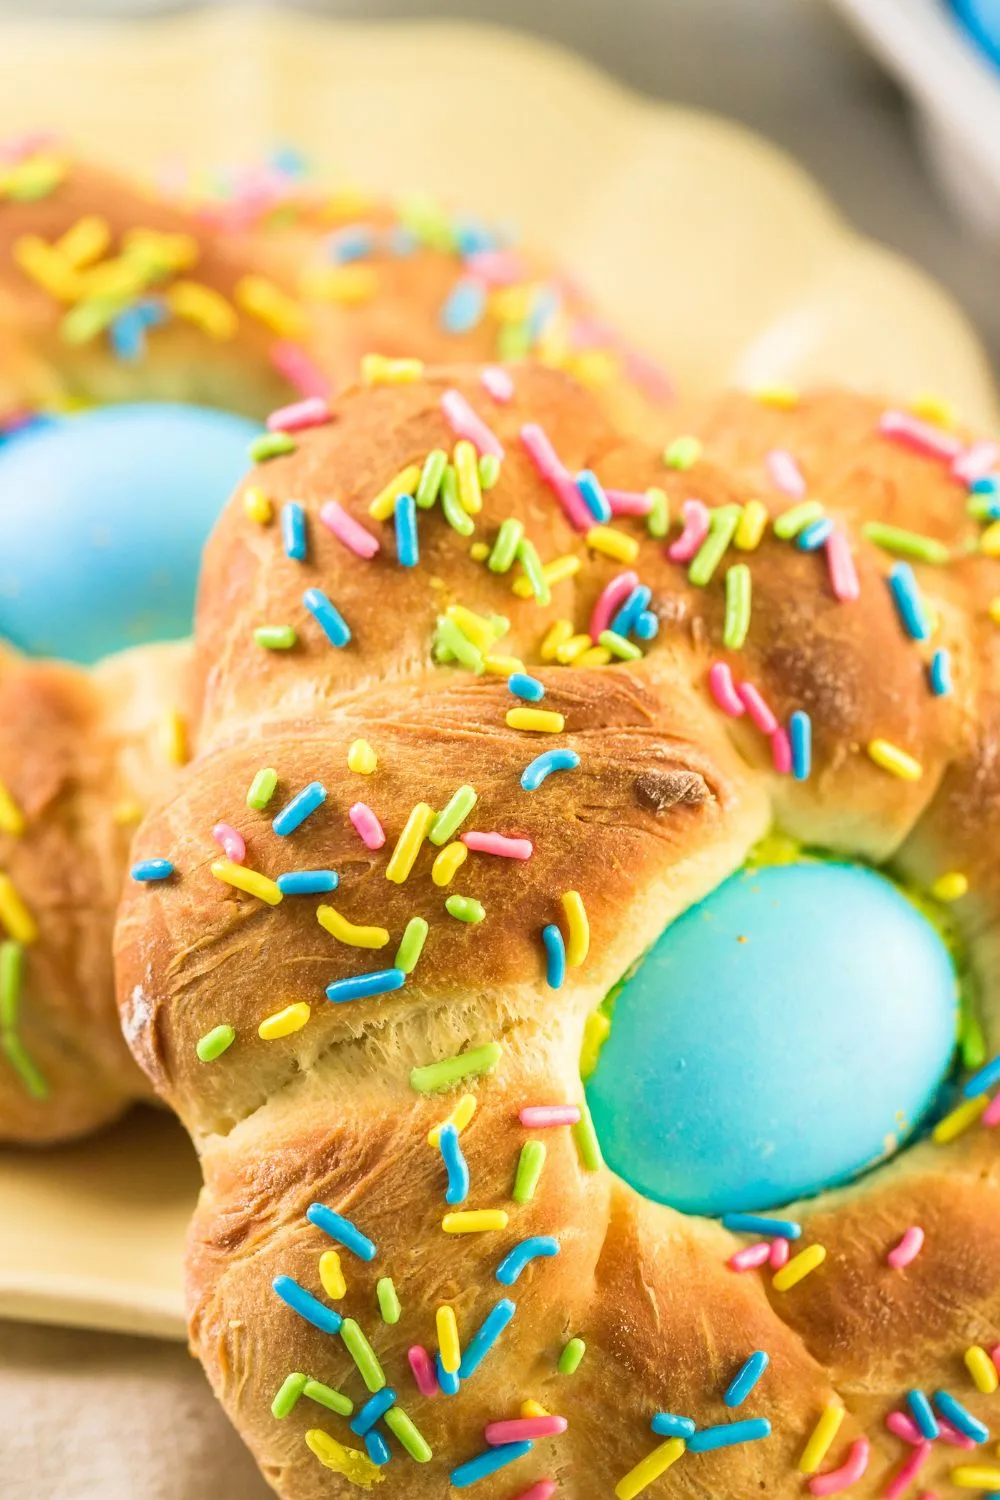 baked Easter dessert with colorful sprinkles